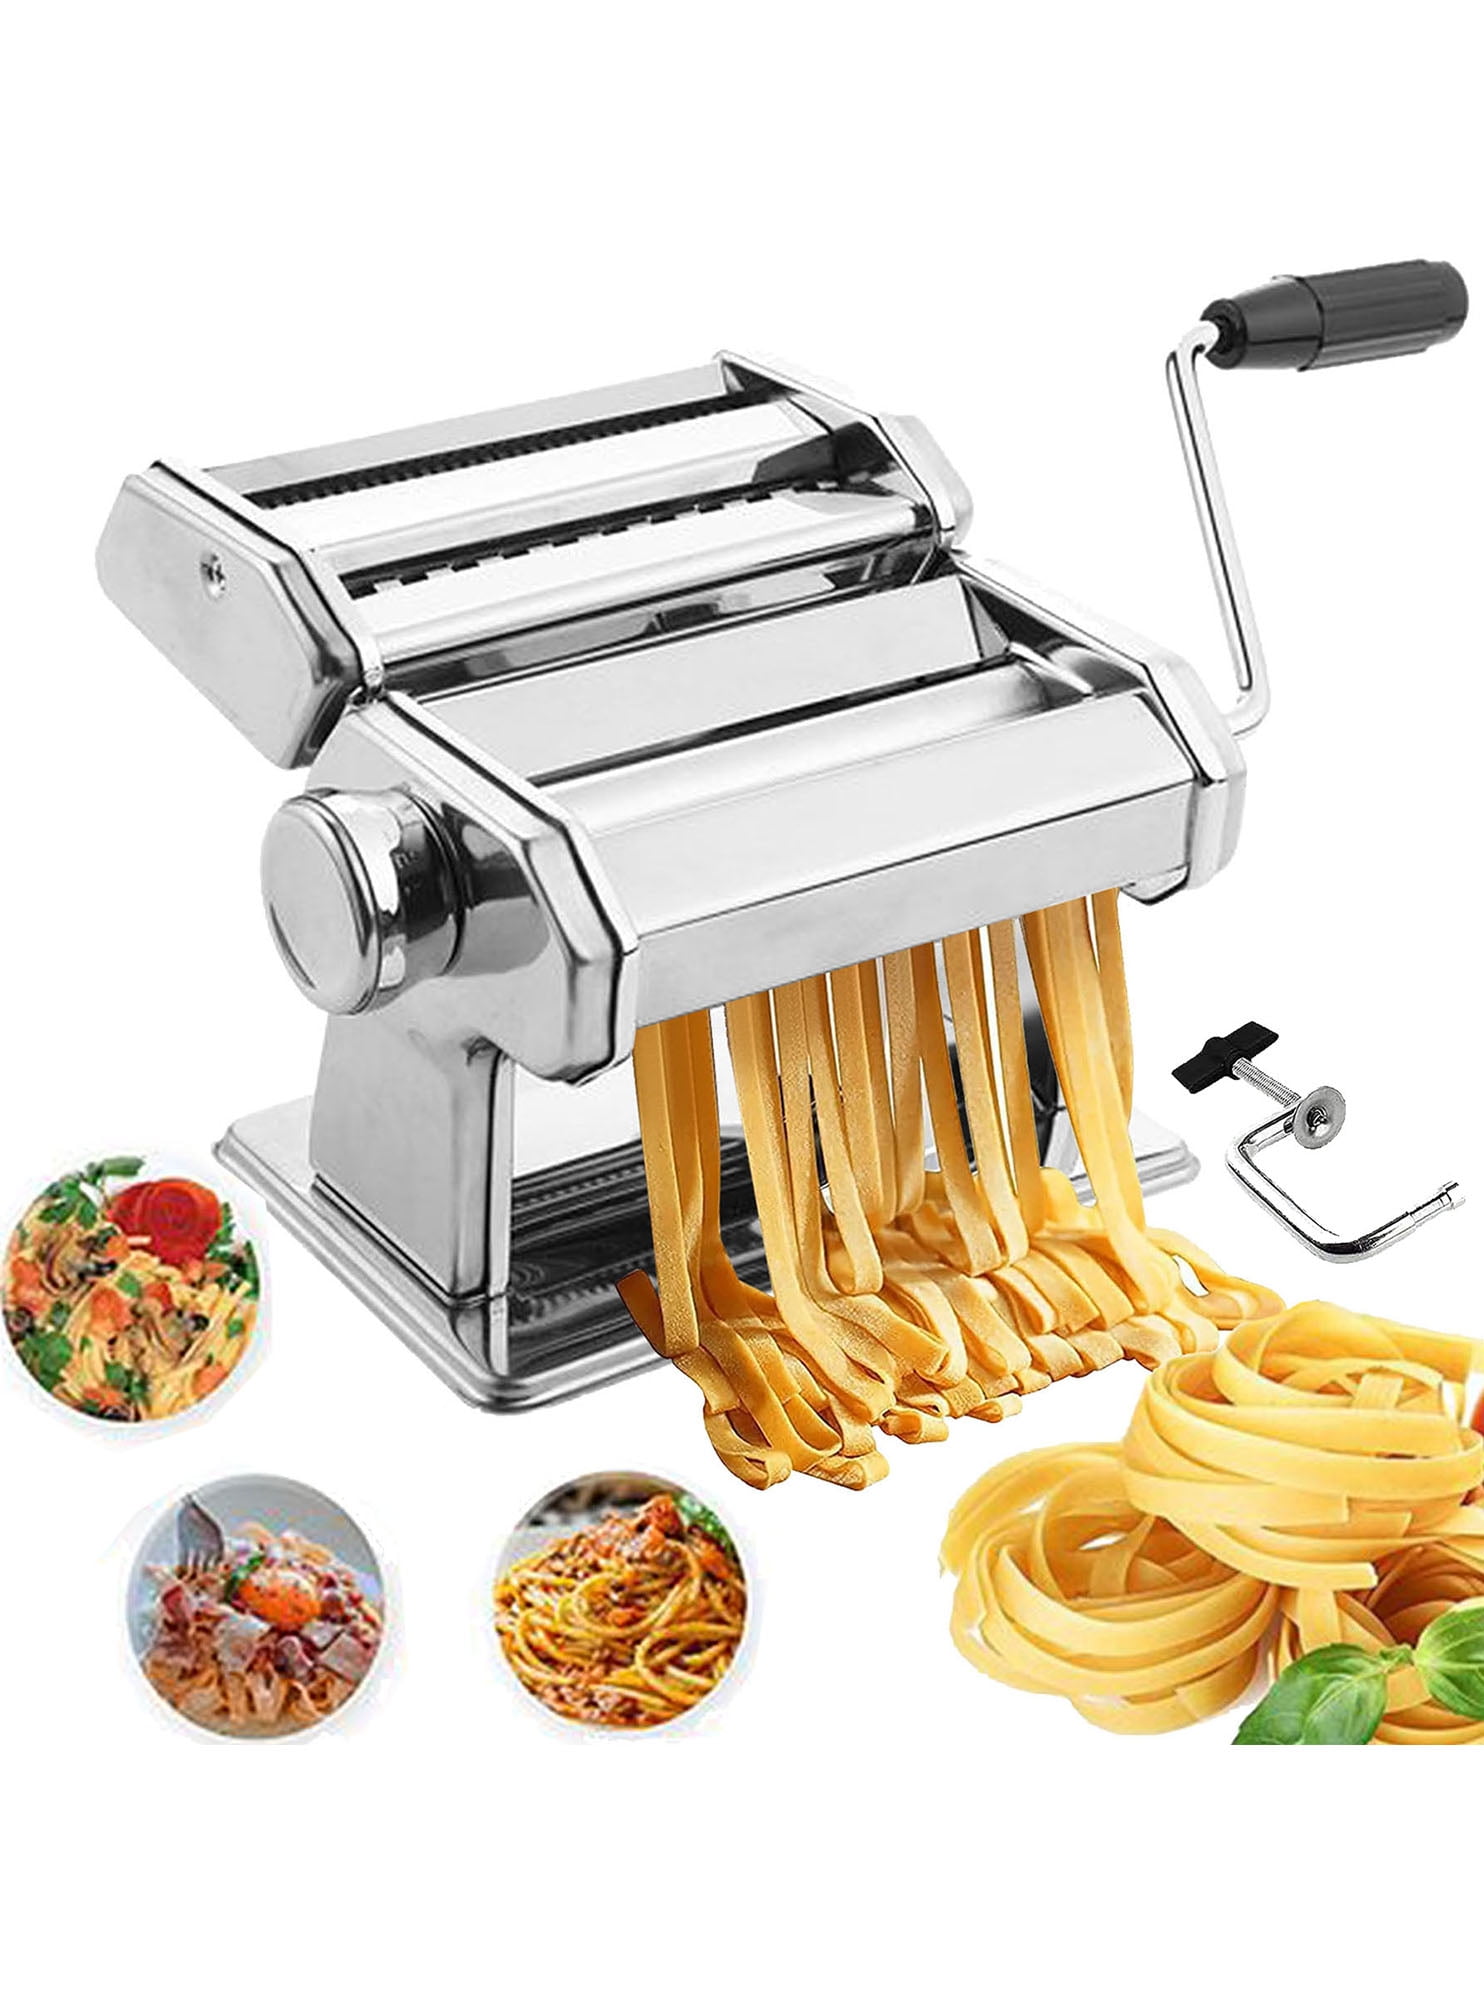 Manual Noodle Maker, Household Small Noodle Rolling Machine Hand Noodle  Making Machine Family Noodle Maker Manual Noodle Rolling Machine,A 